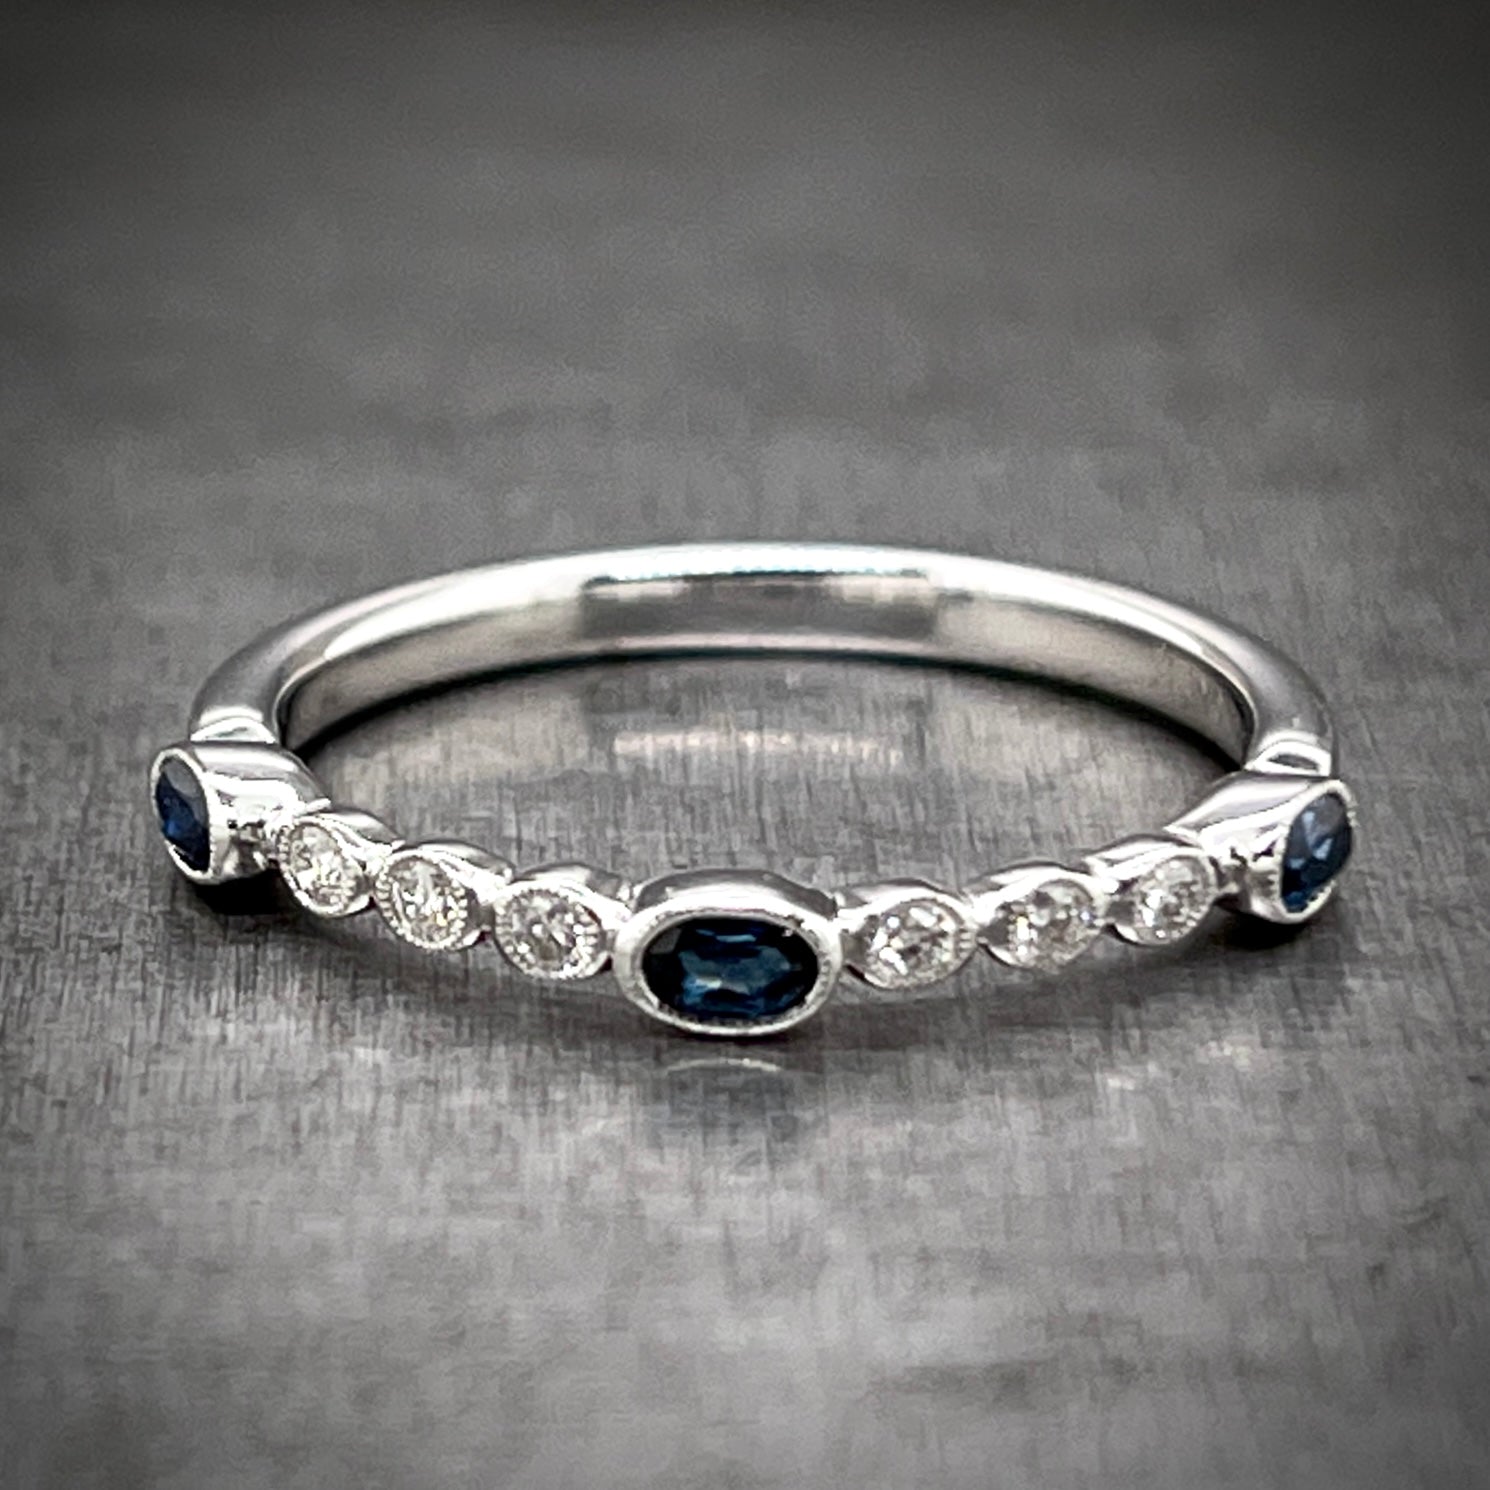 Full view of sapphire and diamond ring laying down.